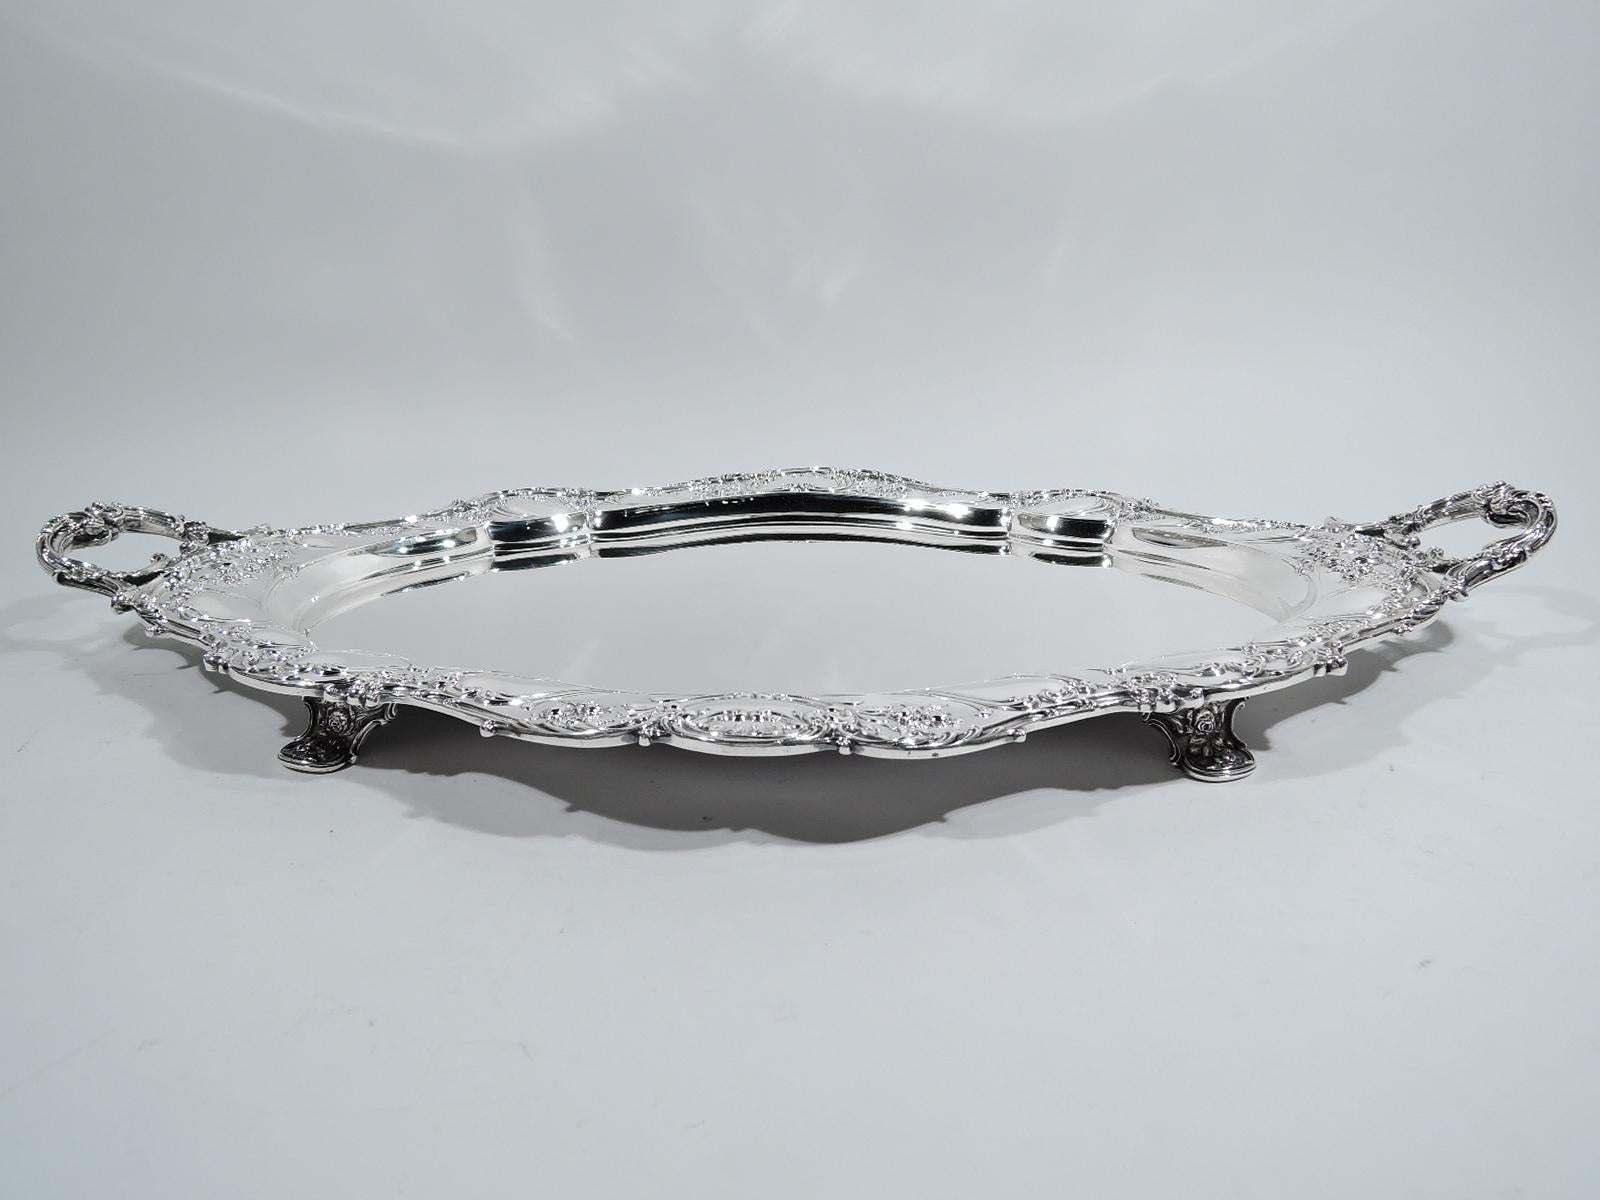 Turn-of-the-century sterling silver tea tray. Made by Gorham in Providence. Plain and shaped oval well. Scrolled rim and chased garlands, blossoms, and wave-like scrolled cartouches on shoulder. Open C-scroll end handles. Rests on four supports.